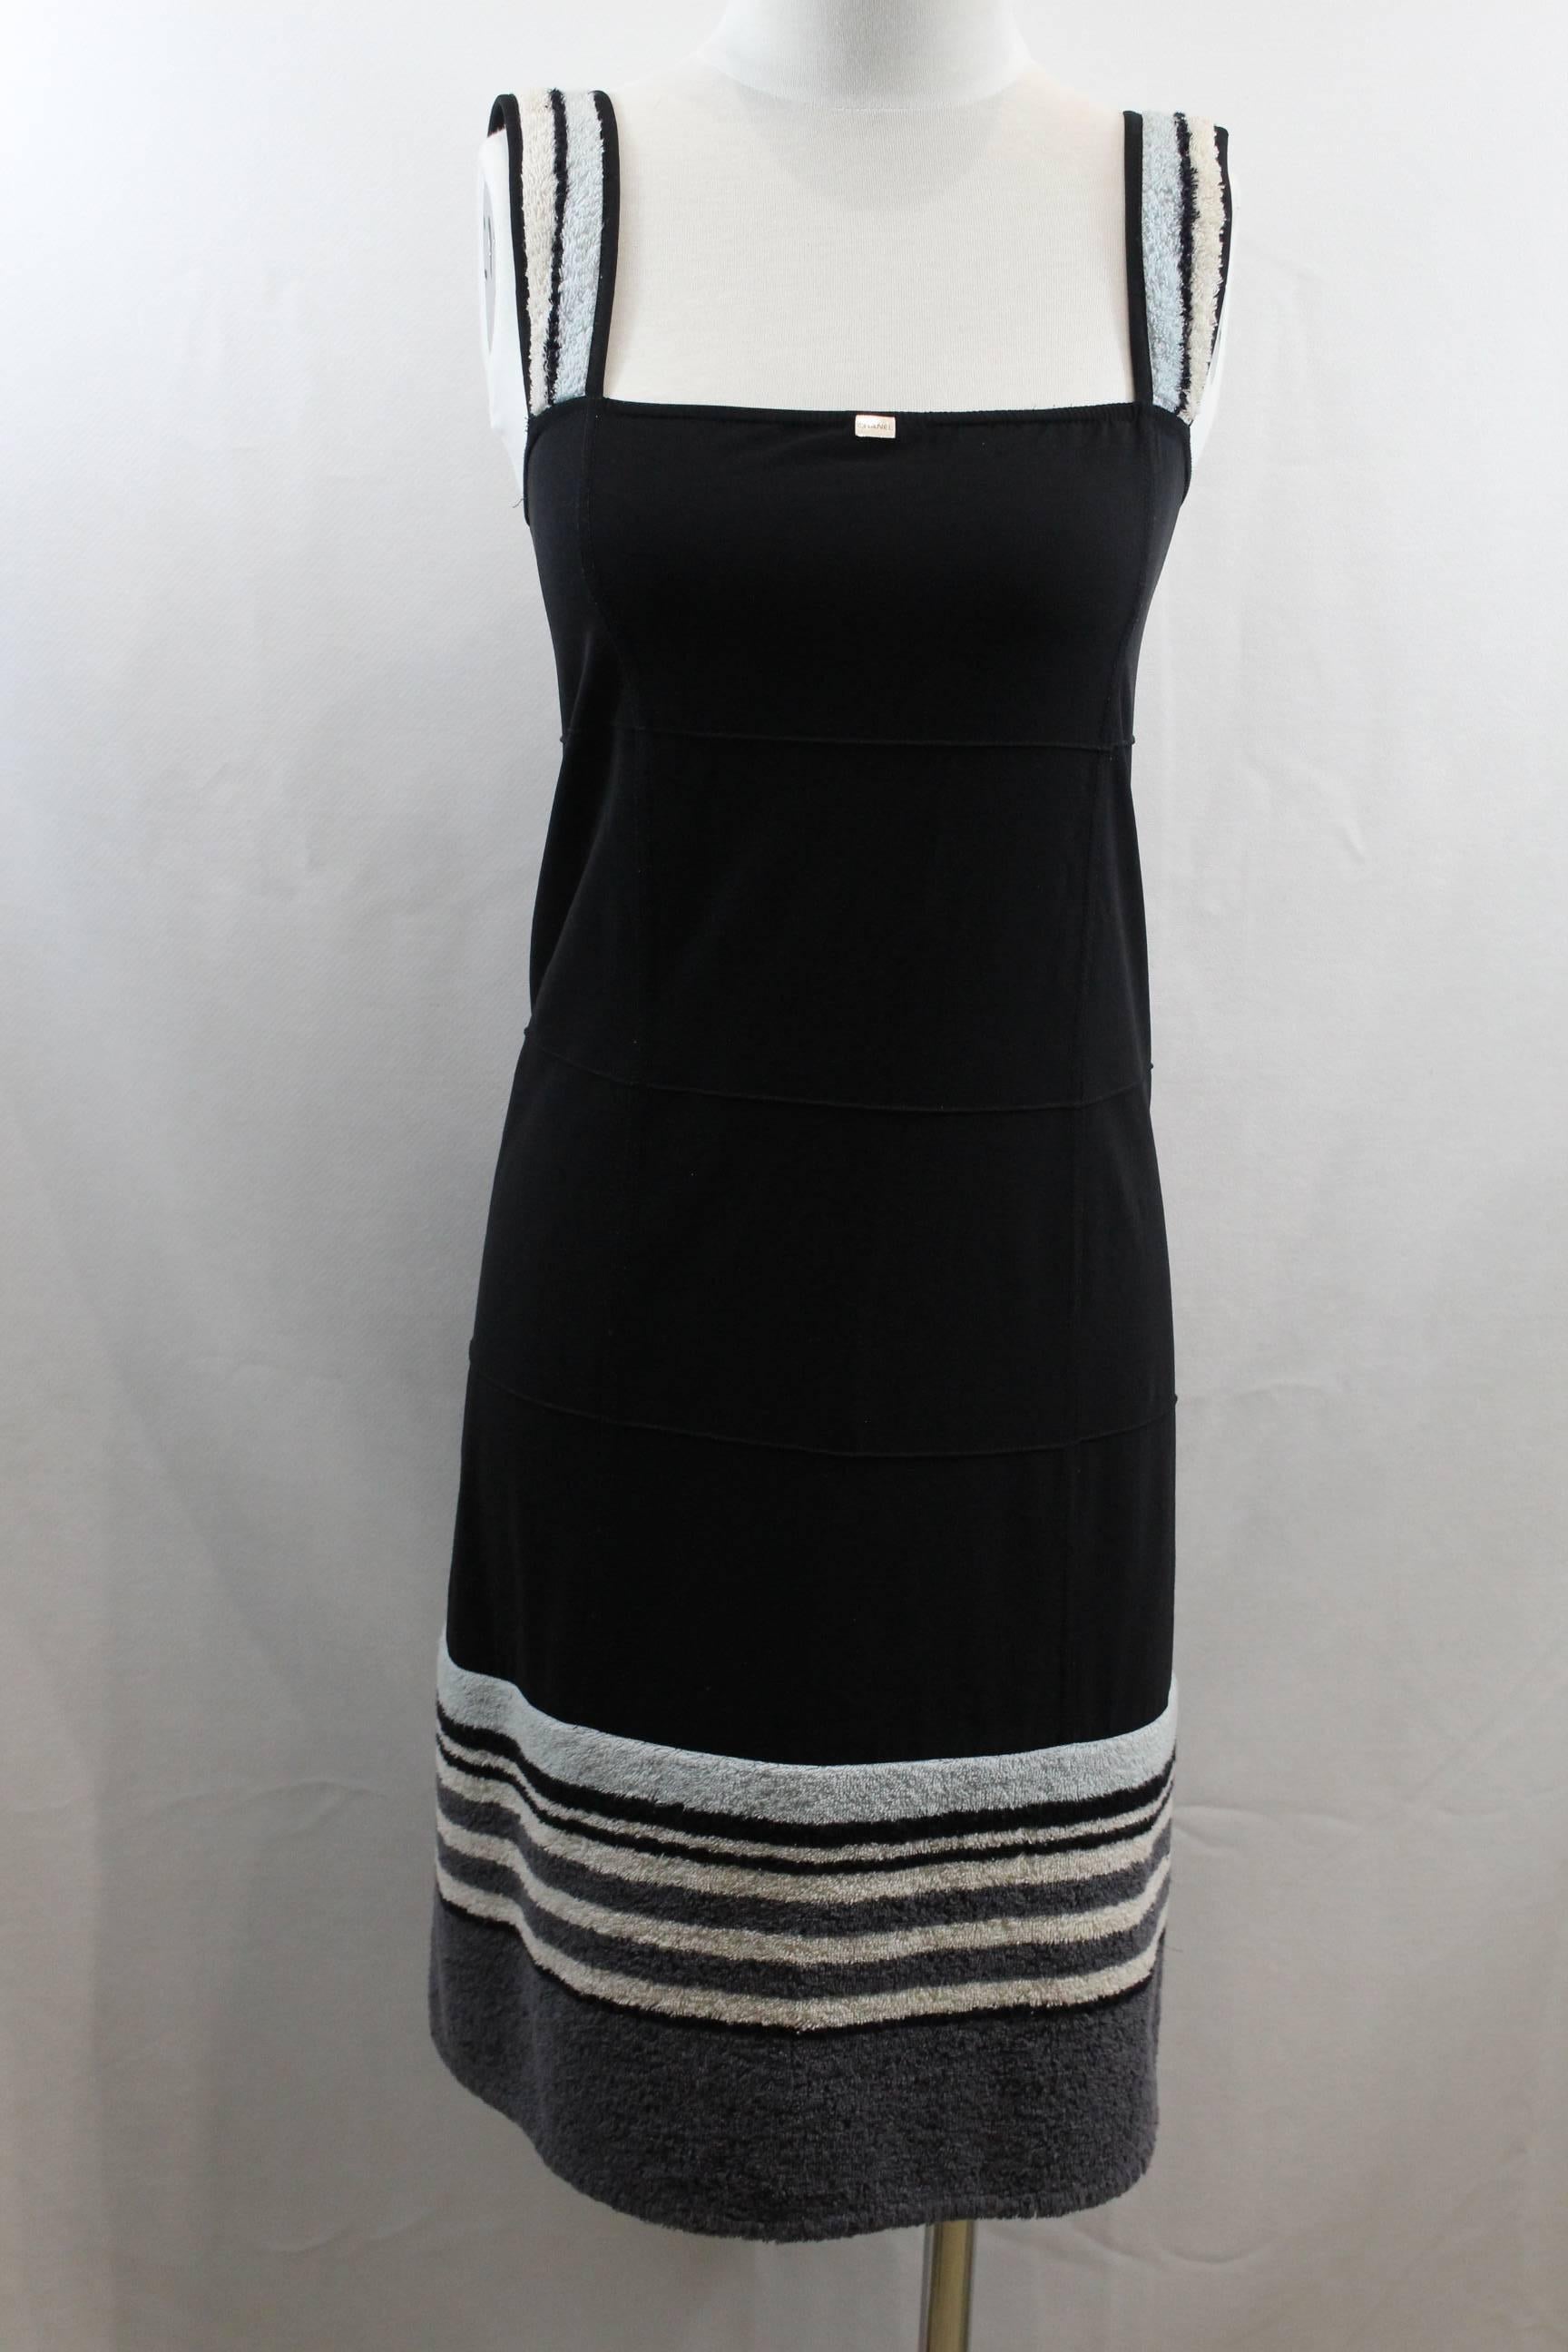 Super nice Chanel dress in nylon and "towel" cloth.

Good conditon and super confortable to wear.

Size 40